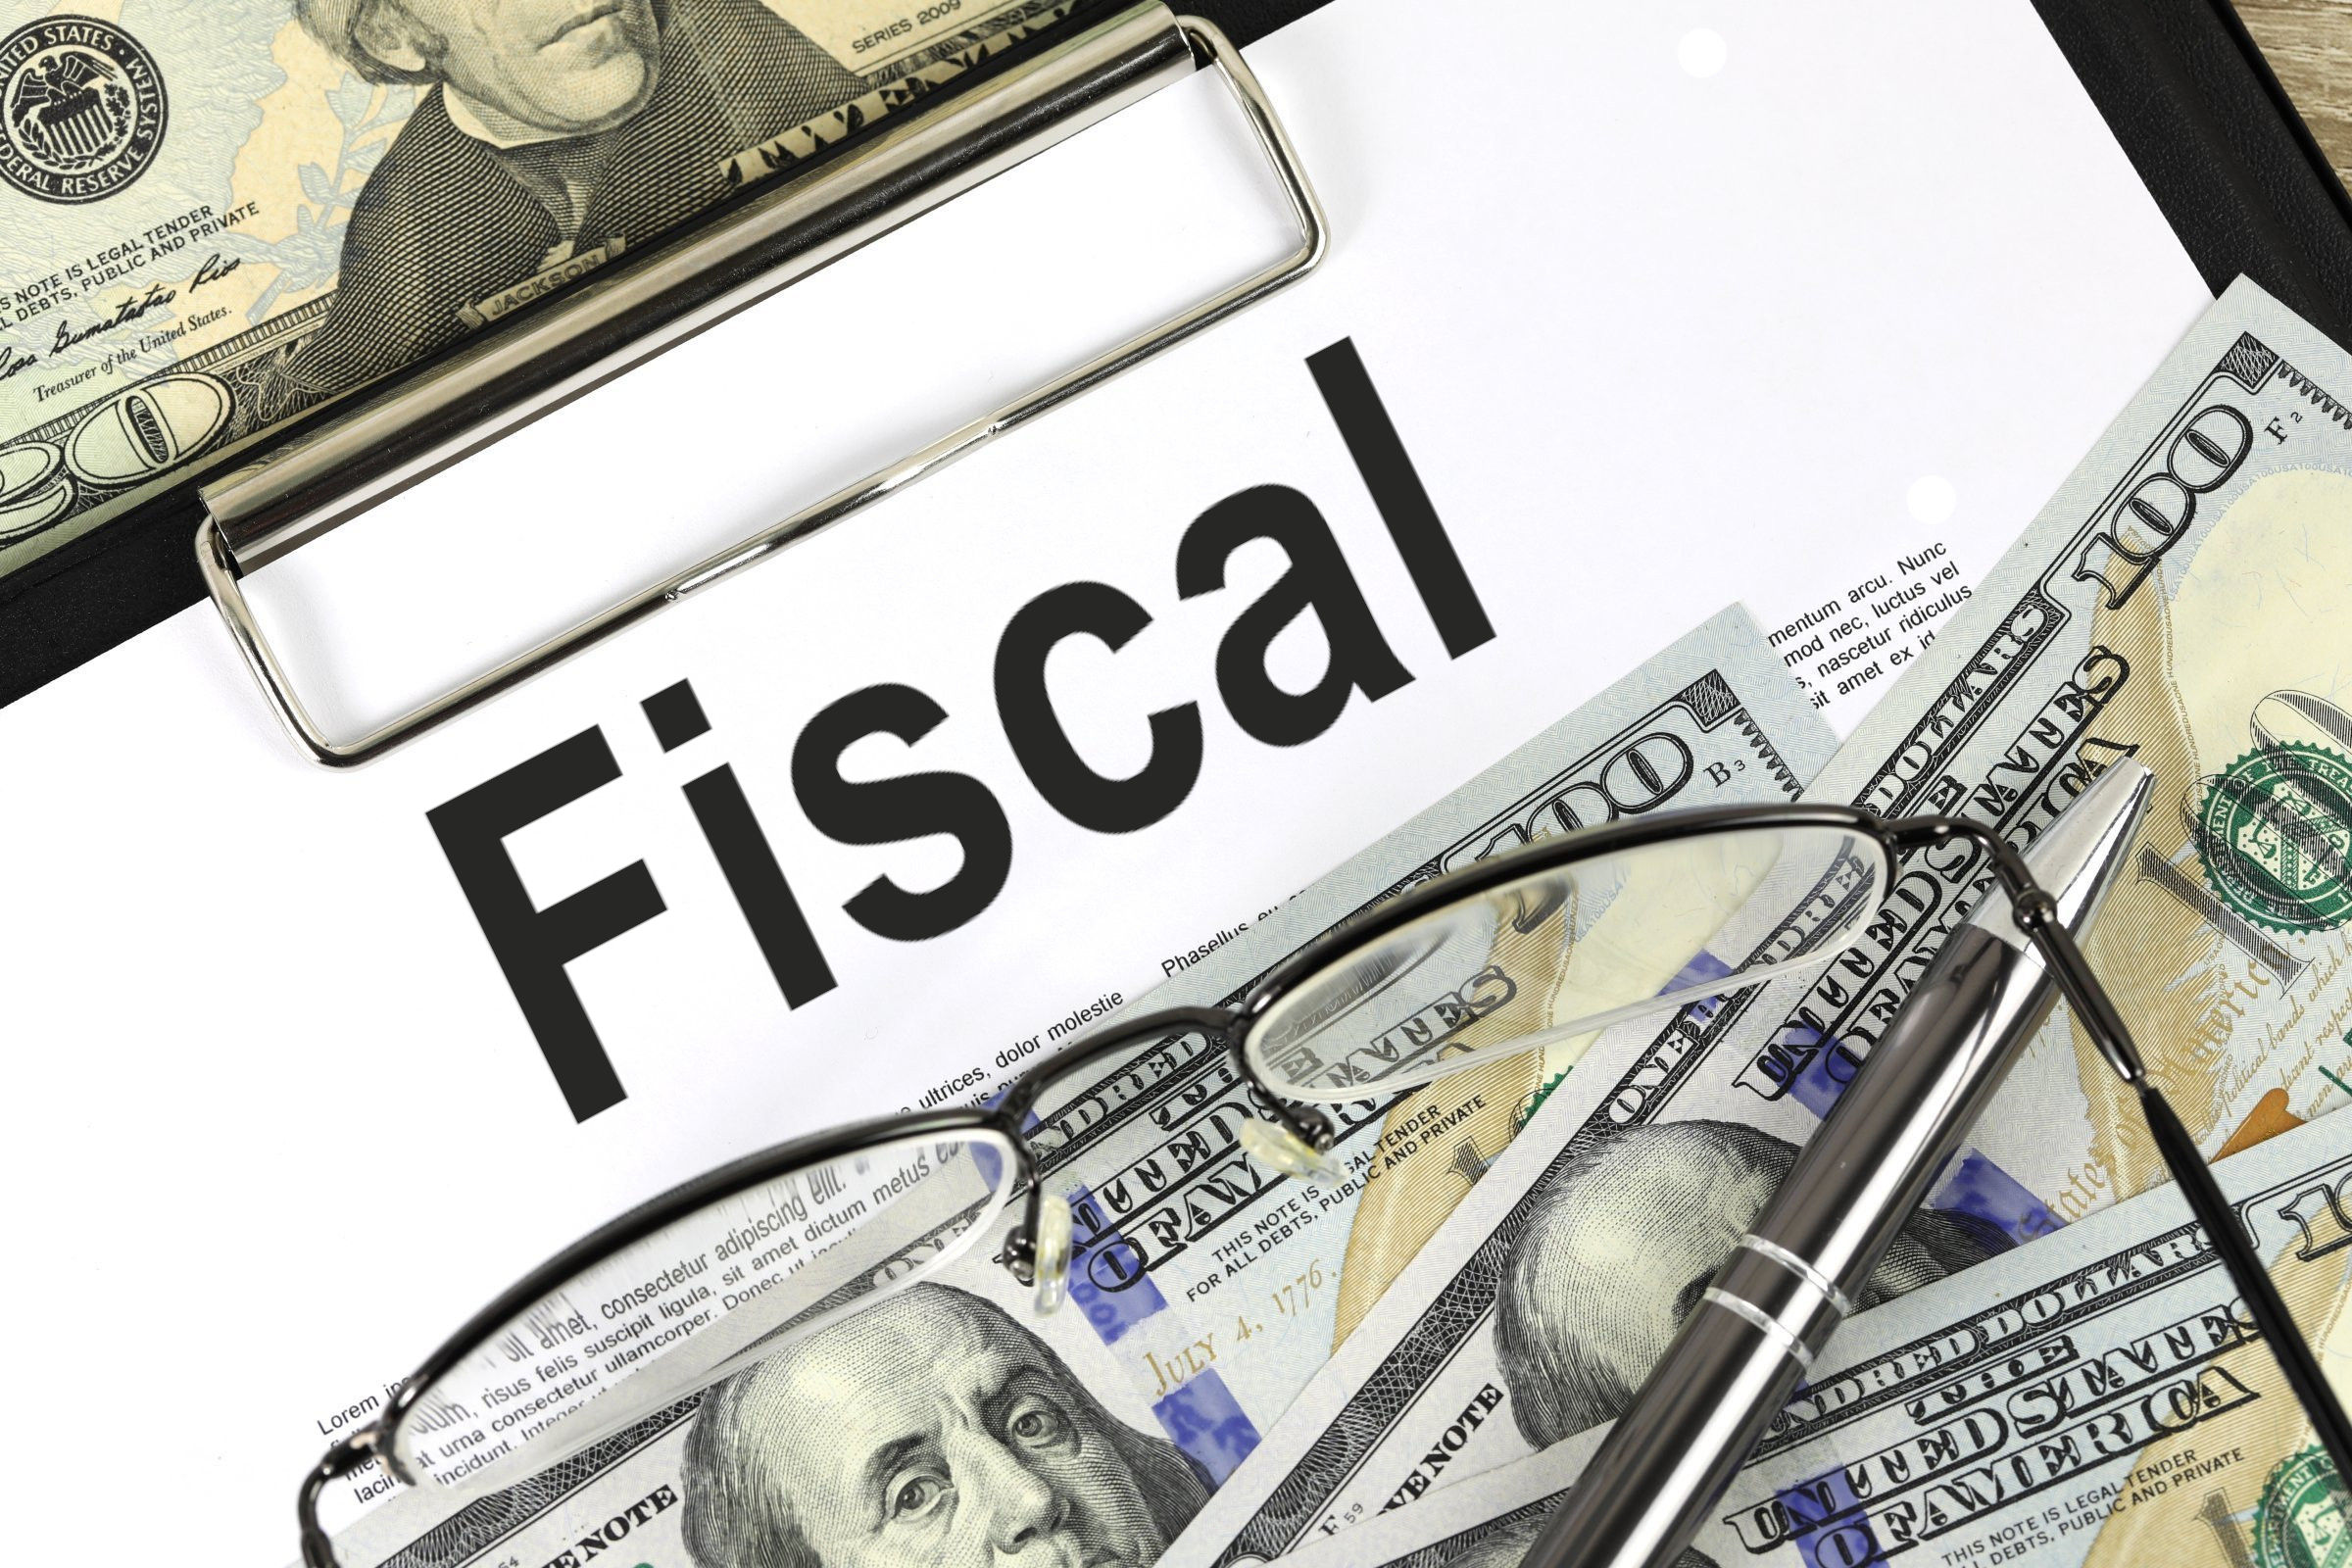 fiscal